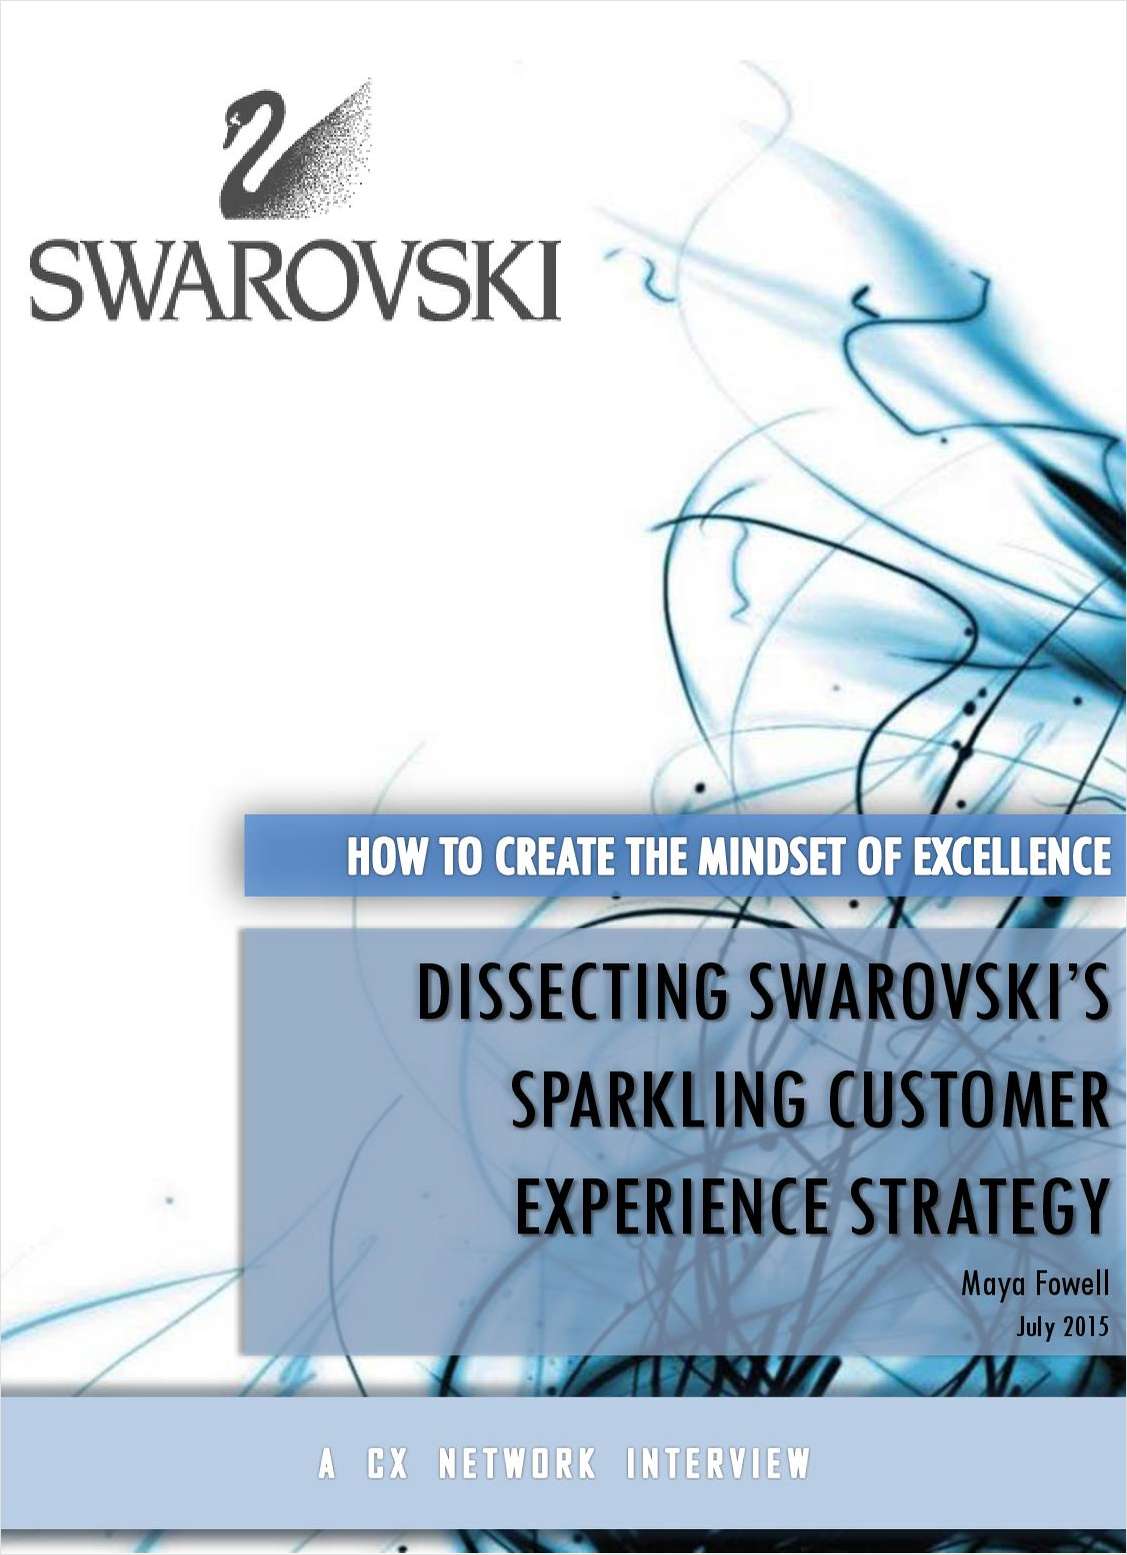 Dissecting Swarovski's Sparkling Customer Experience Strategy